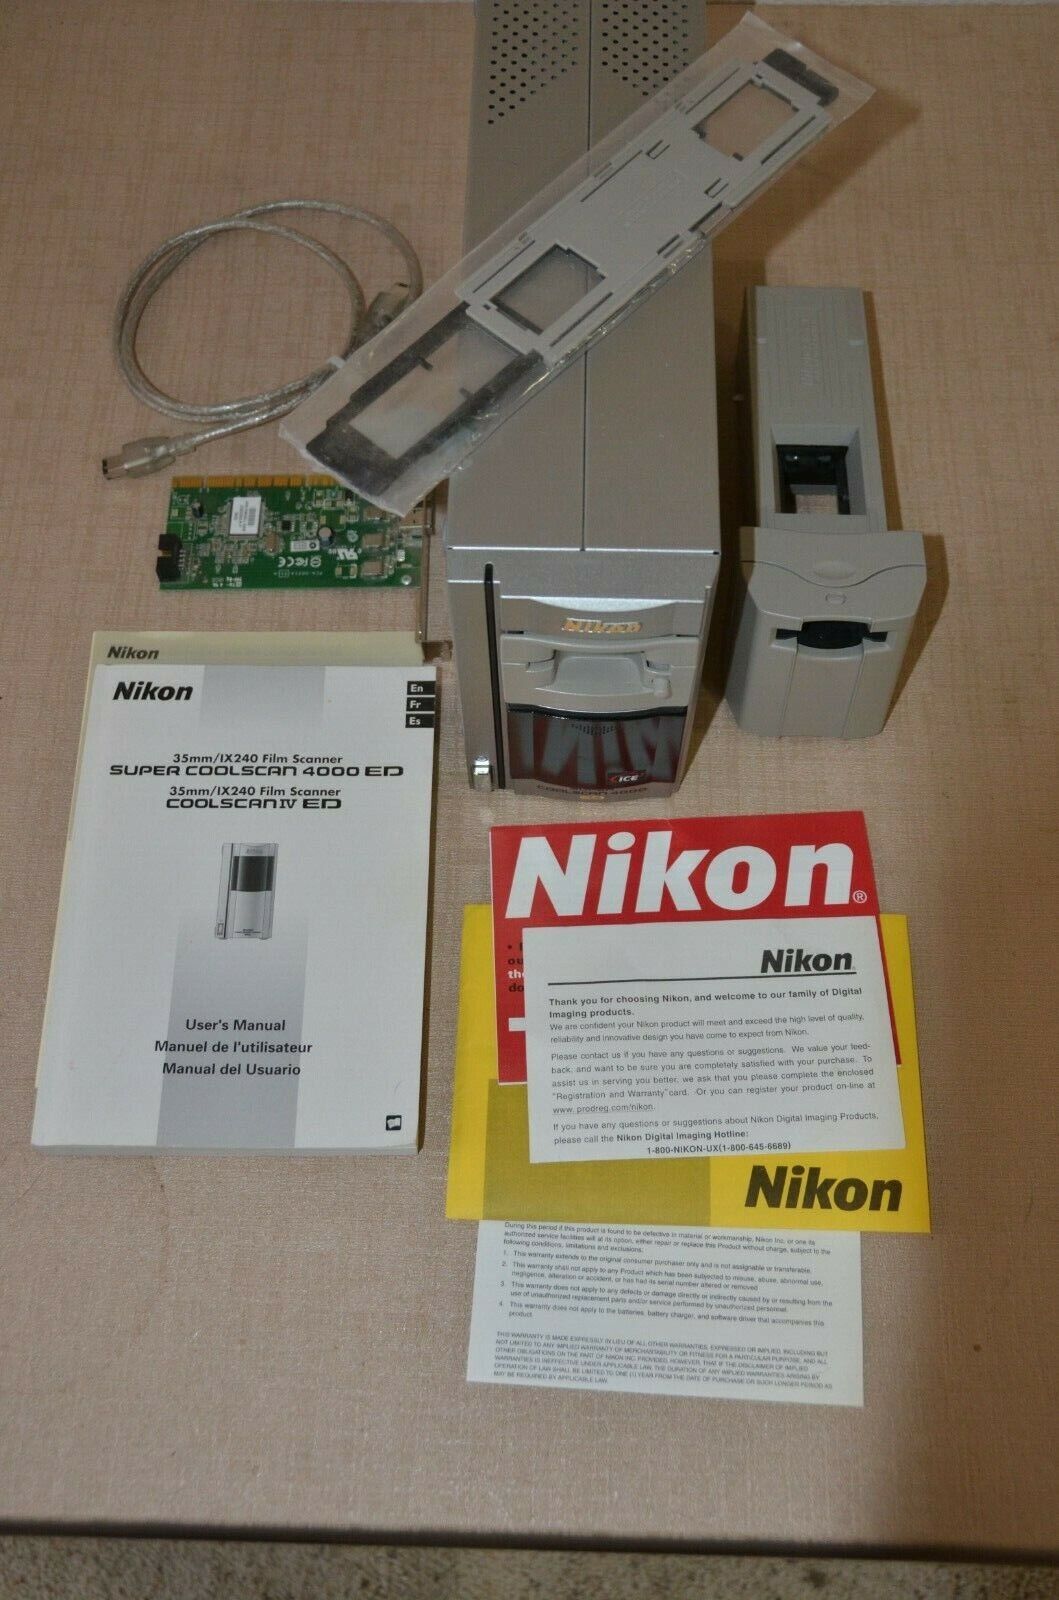 Nikon Super Coolscan 4000 ED slide & film scanner, ICE feature, all accessories